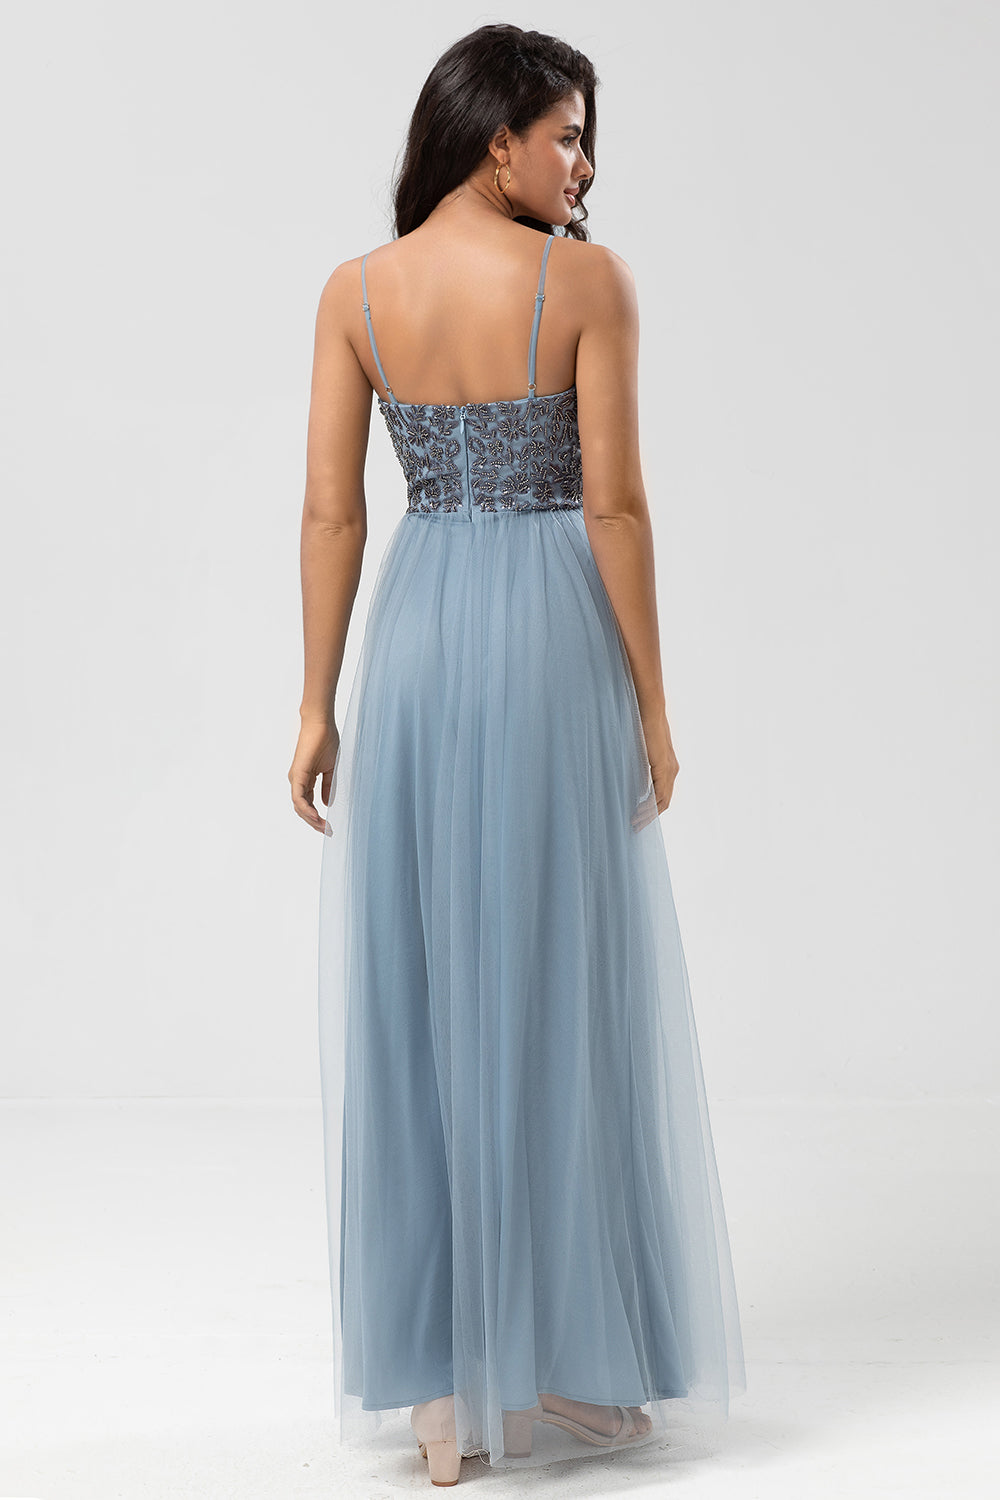 Chic Romantic A Line Spaghetti Straps Dusty Blue Long Bridesmaid Dress with Beading